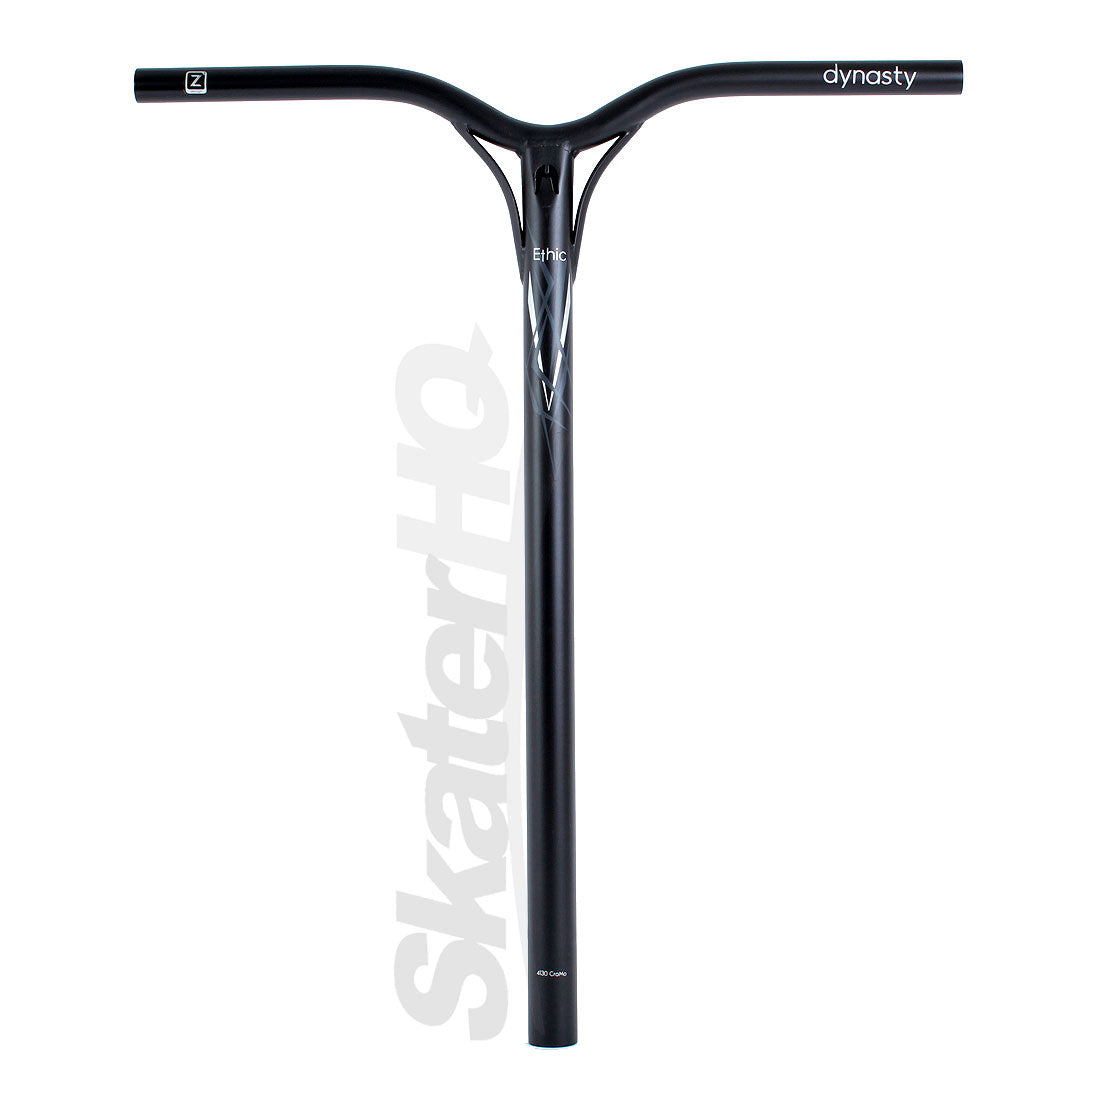 Ethic Dynasty Bar 620 Black Scooter Bars